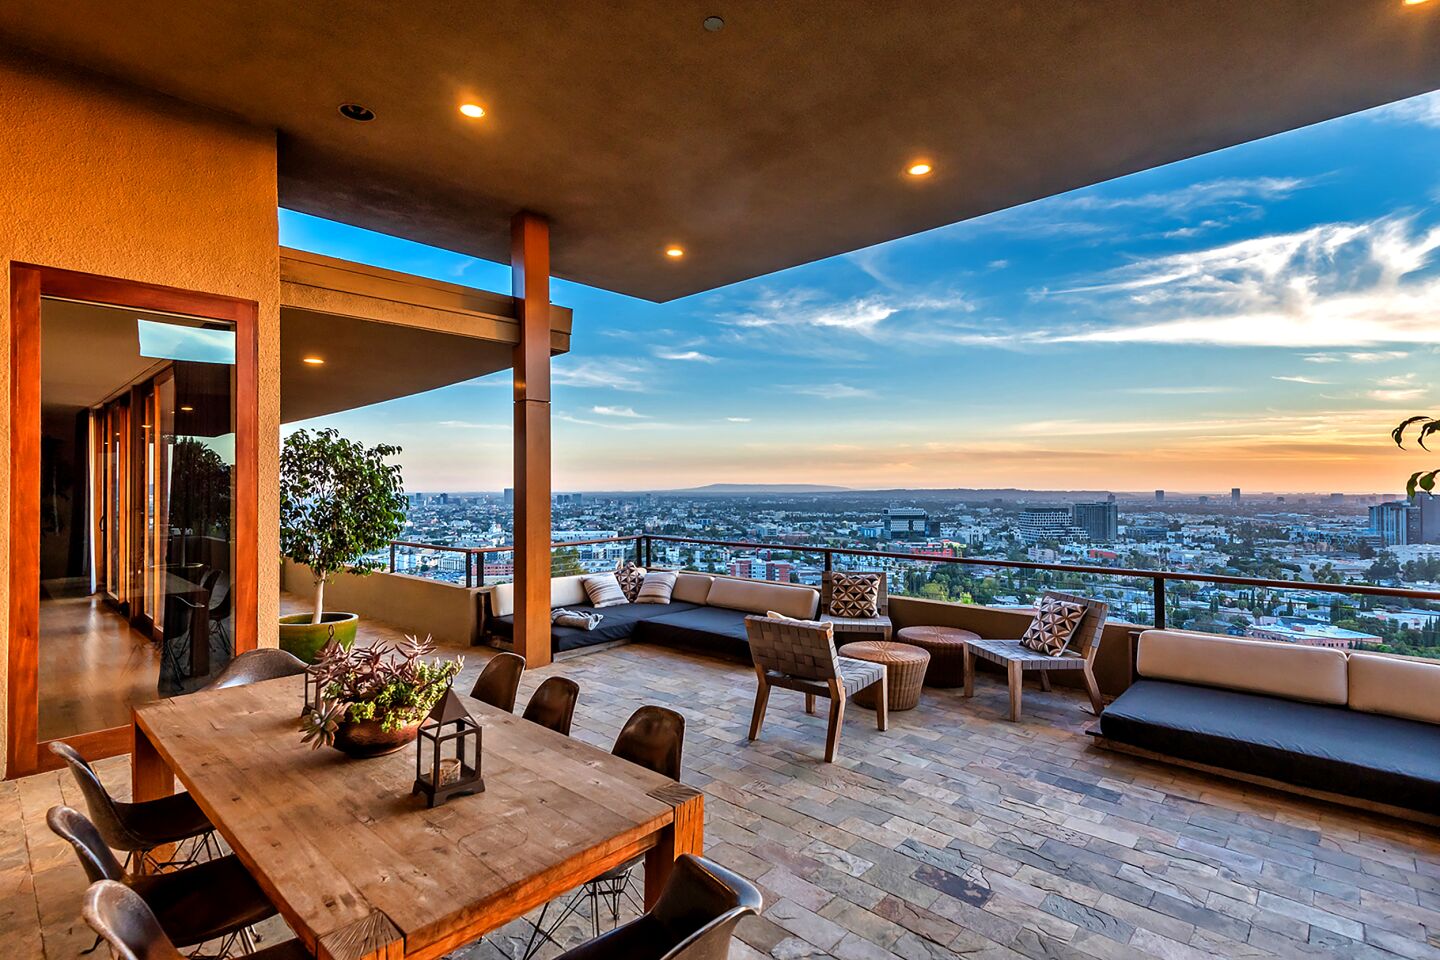 A spacious balcony has outdoor seating, a dining area and a view of the city.